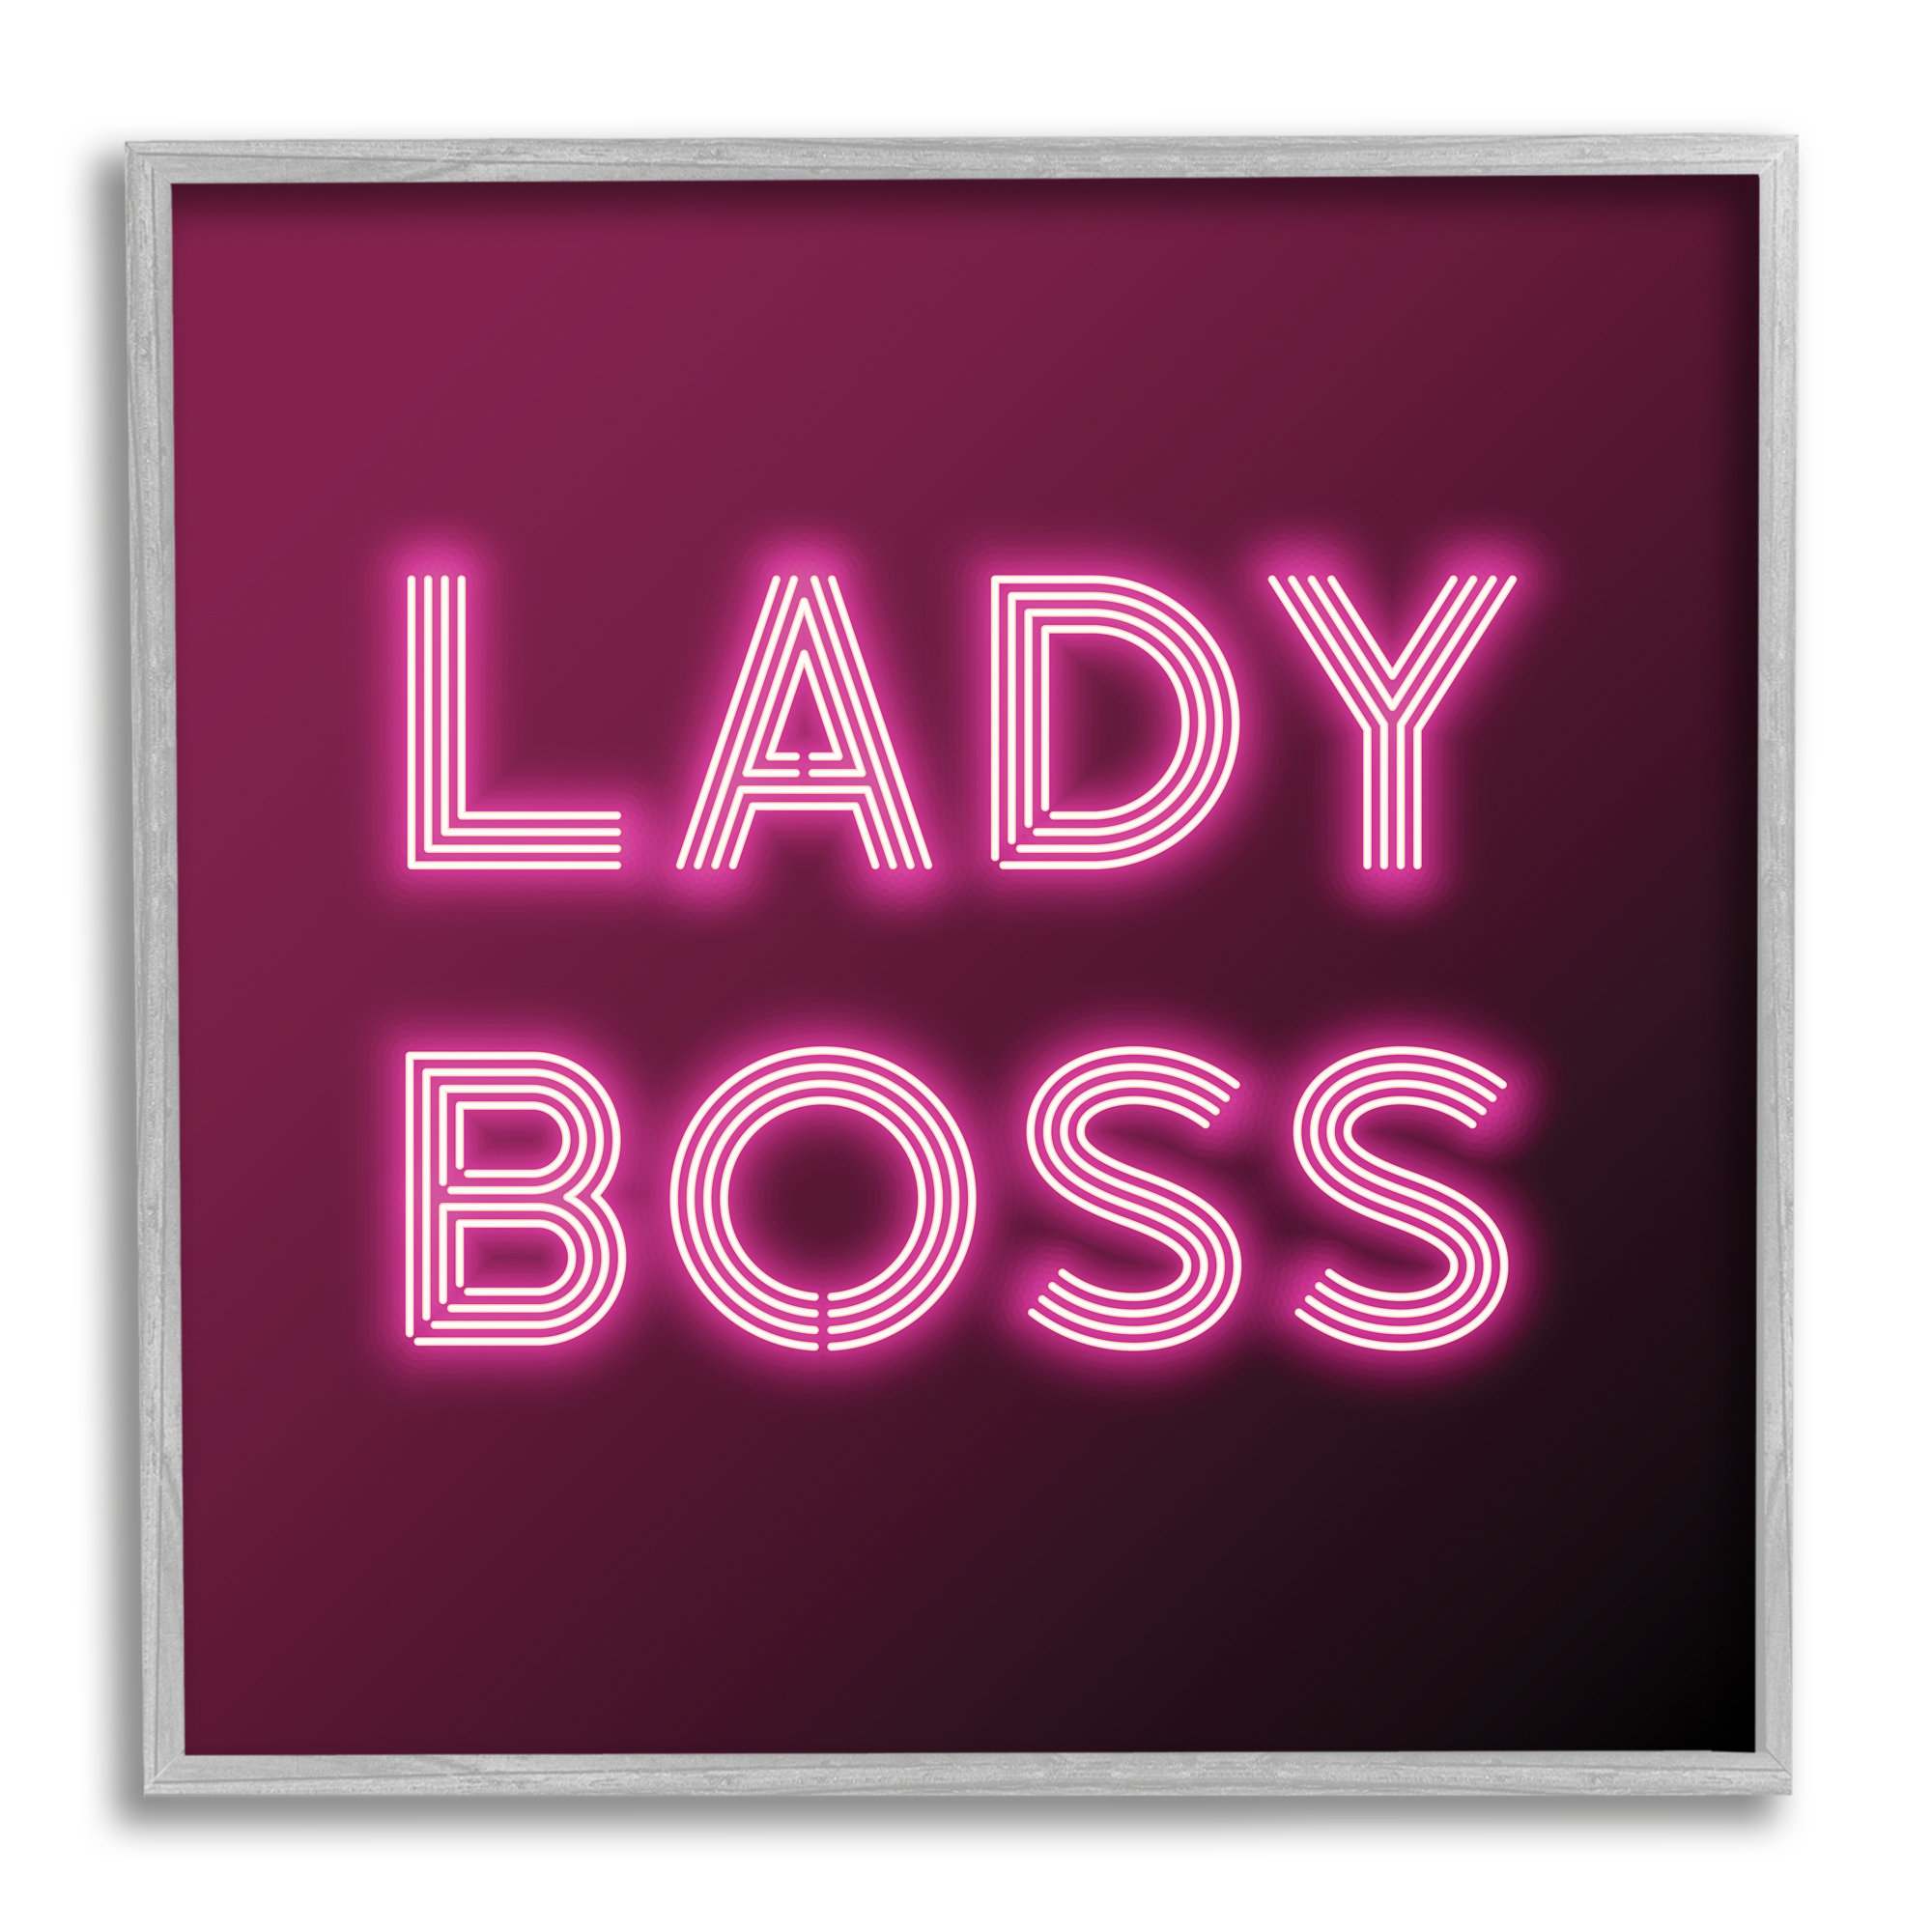 Boss Lady Limited Edition 5x7 Canvas